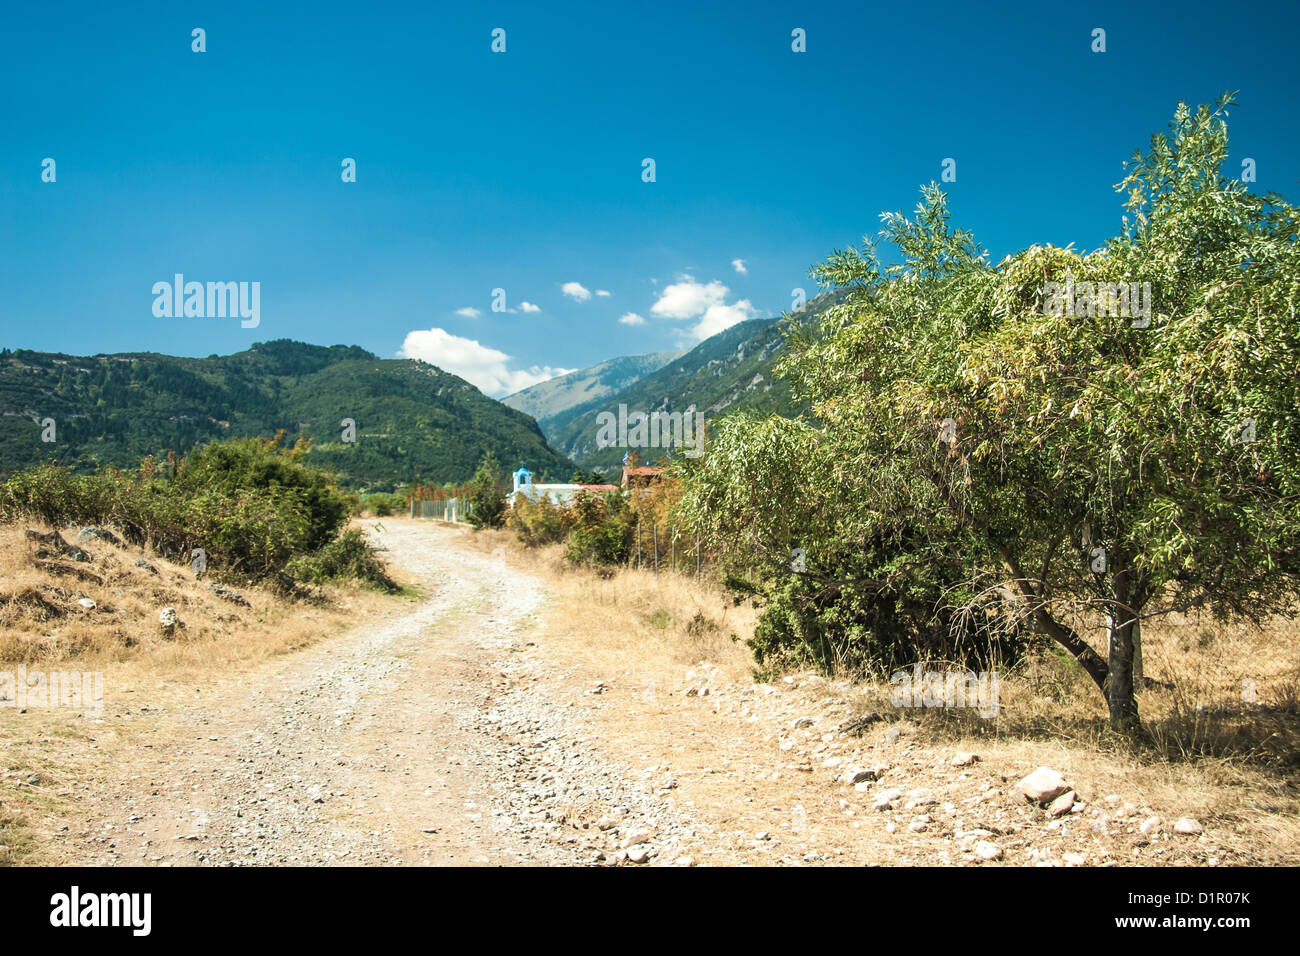 Green Olive trees at Greece country side Stock Photo